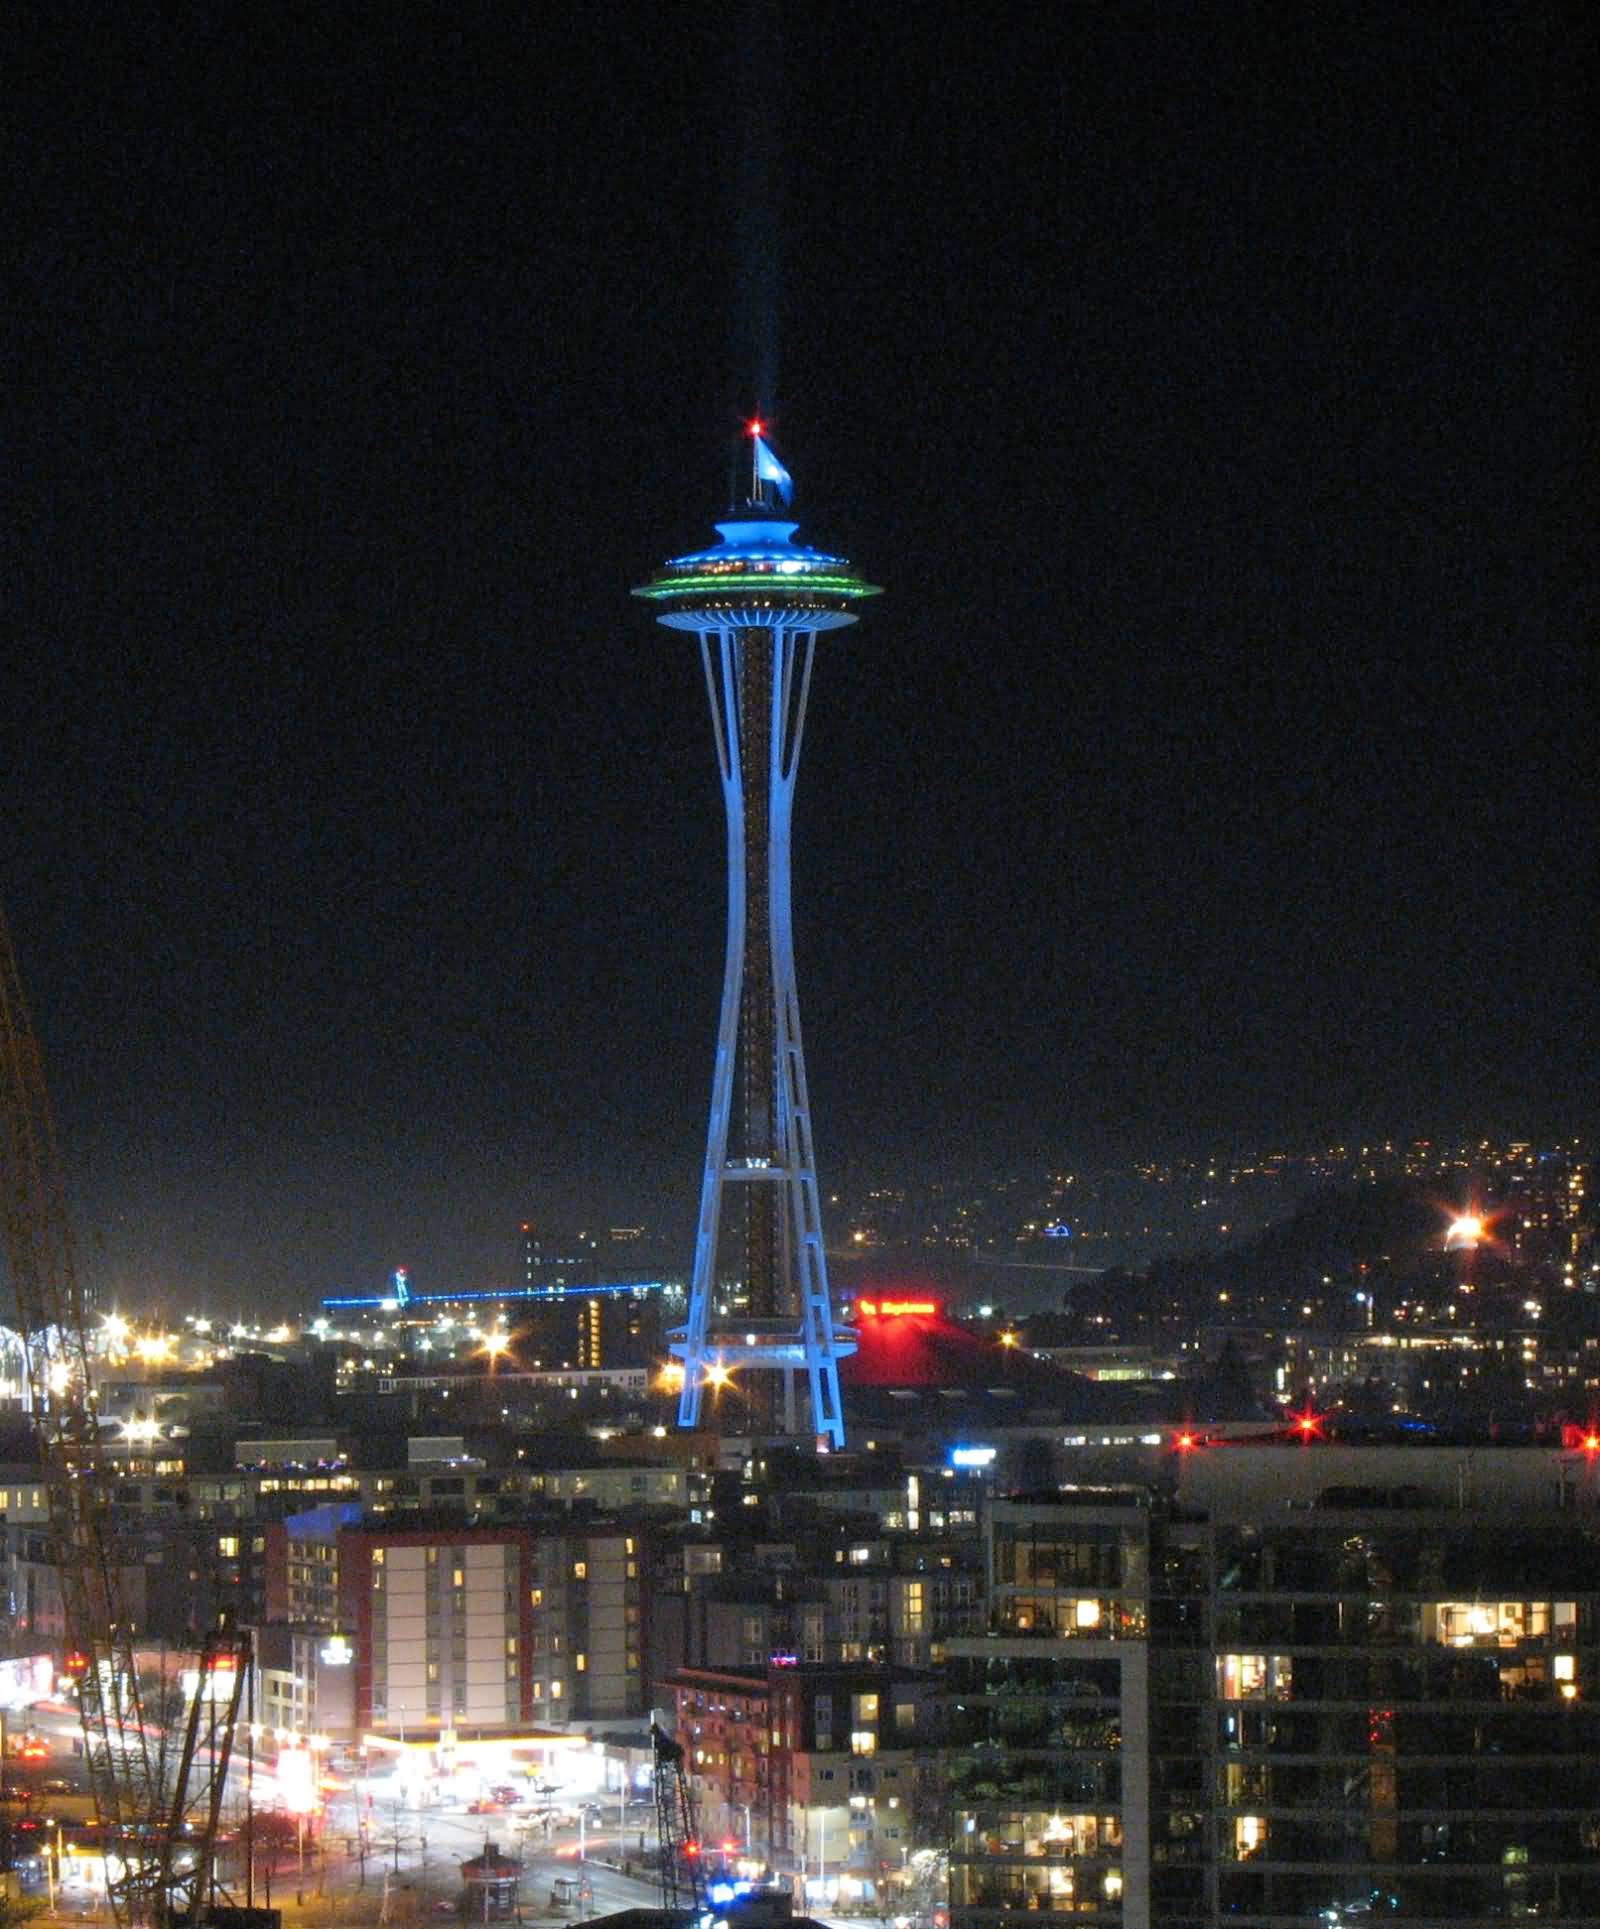 42 Night Pictures Of Space Needle Tower In Seattle, Washington